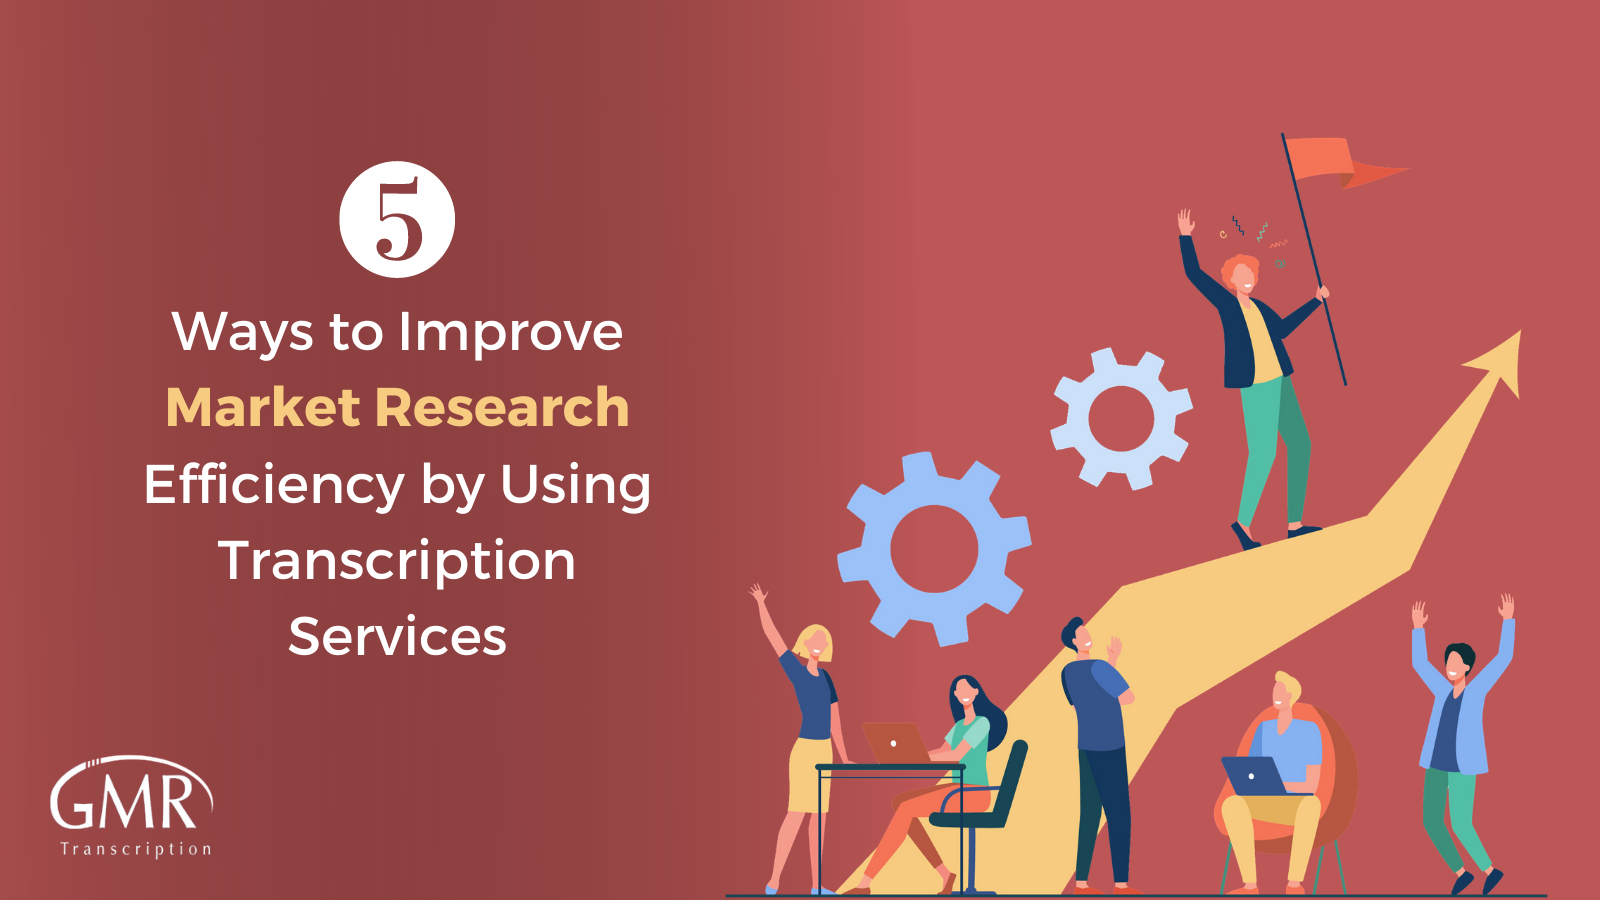 5 Ways to Improve Market Research Efficiency by Using Transcription Services